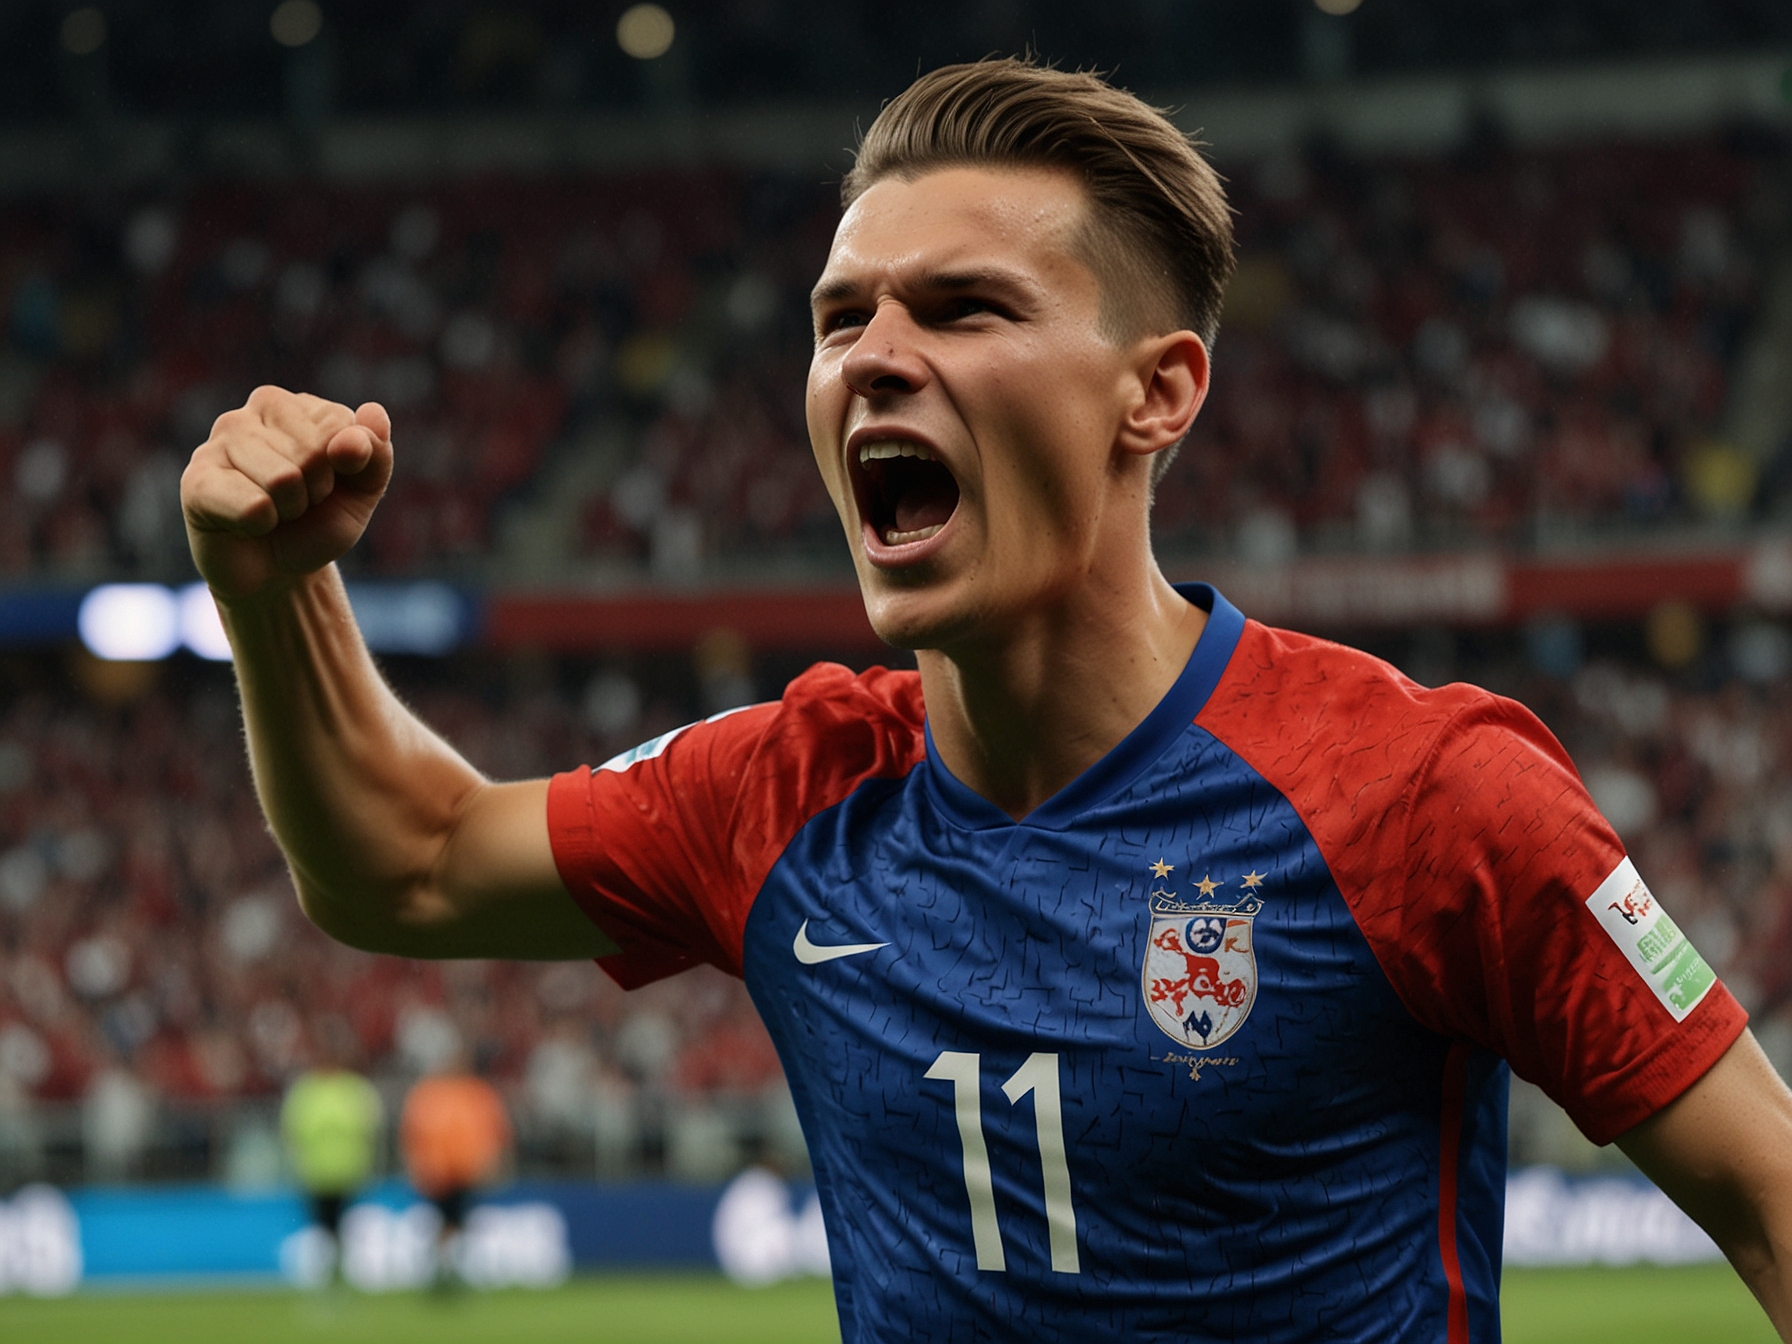 Patrik Schick of the Czech Republic celebrates after scoring a crucial equalizer in the 55th minute, salvaging a point for his team in a 1-1 draw against Georgia in the Euro 2024 qualifiers.